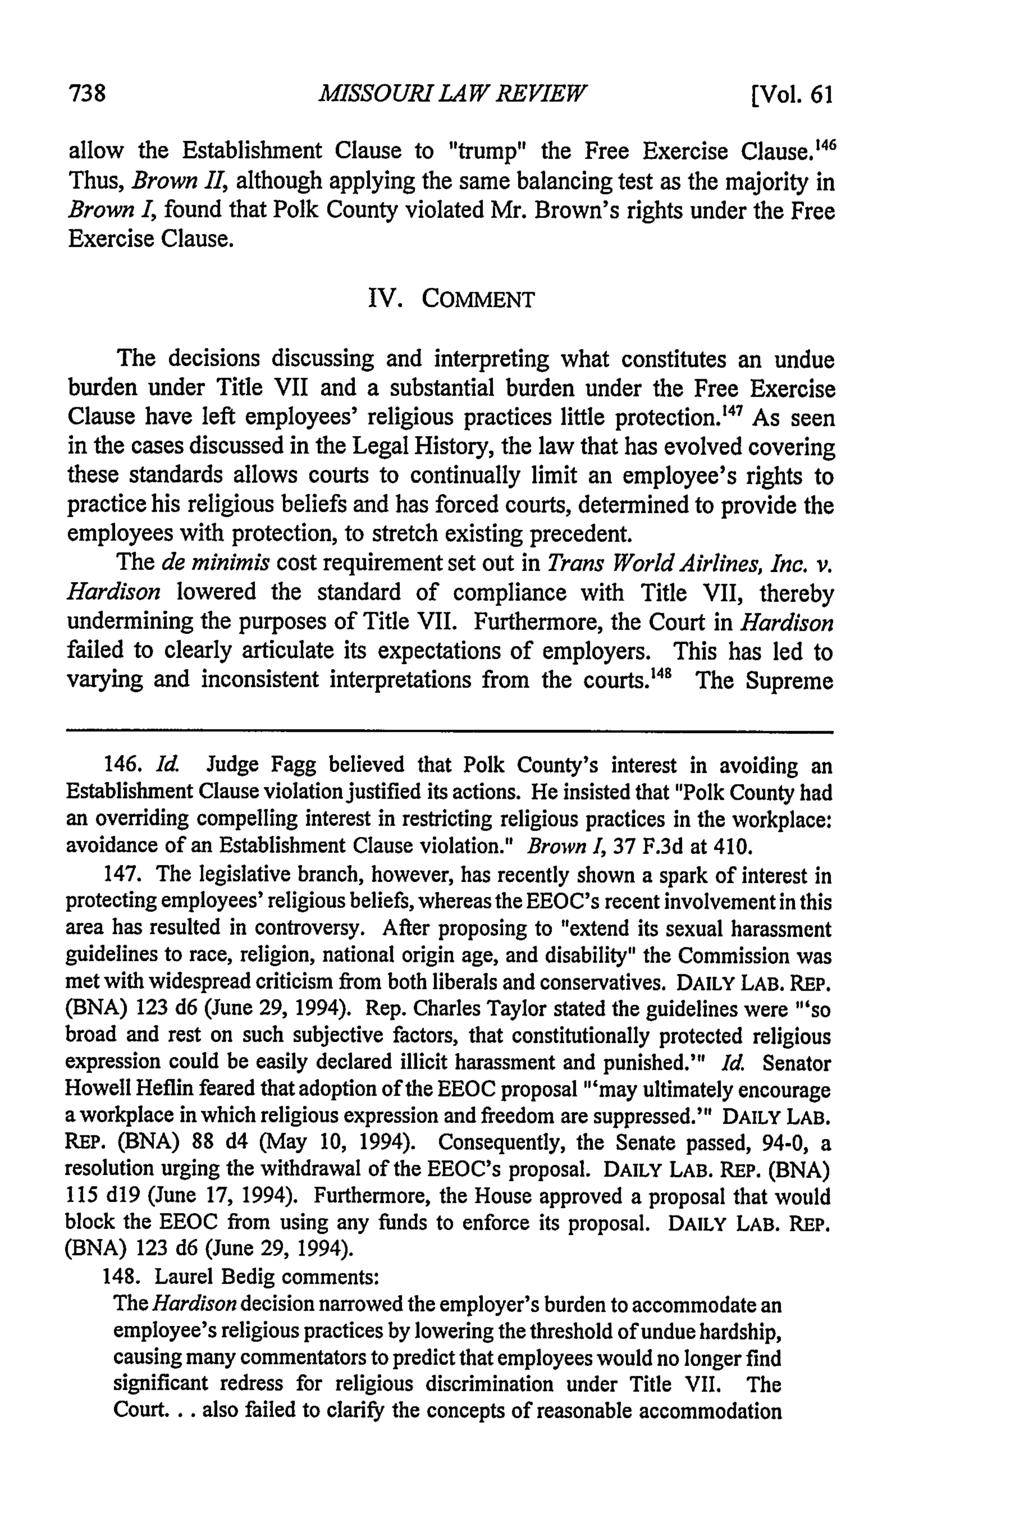 Missouri Law Review, Vol. 61, Iss. 3 [1996], Art. 9 MISSOURI LAW REVIEW [Vol. 61 allow the Establishment Clause to "trump" the Free Exercise Clause.